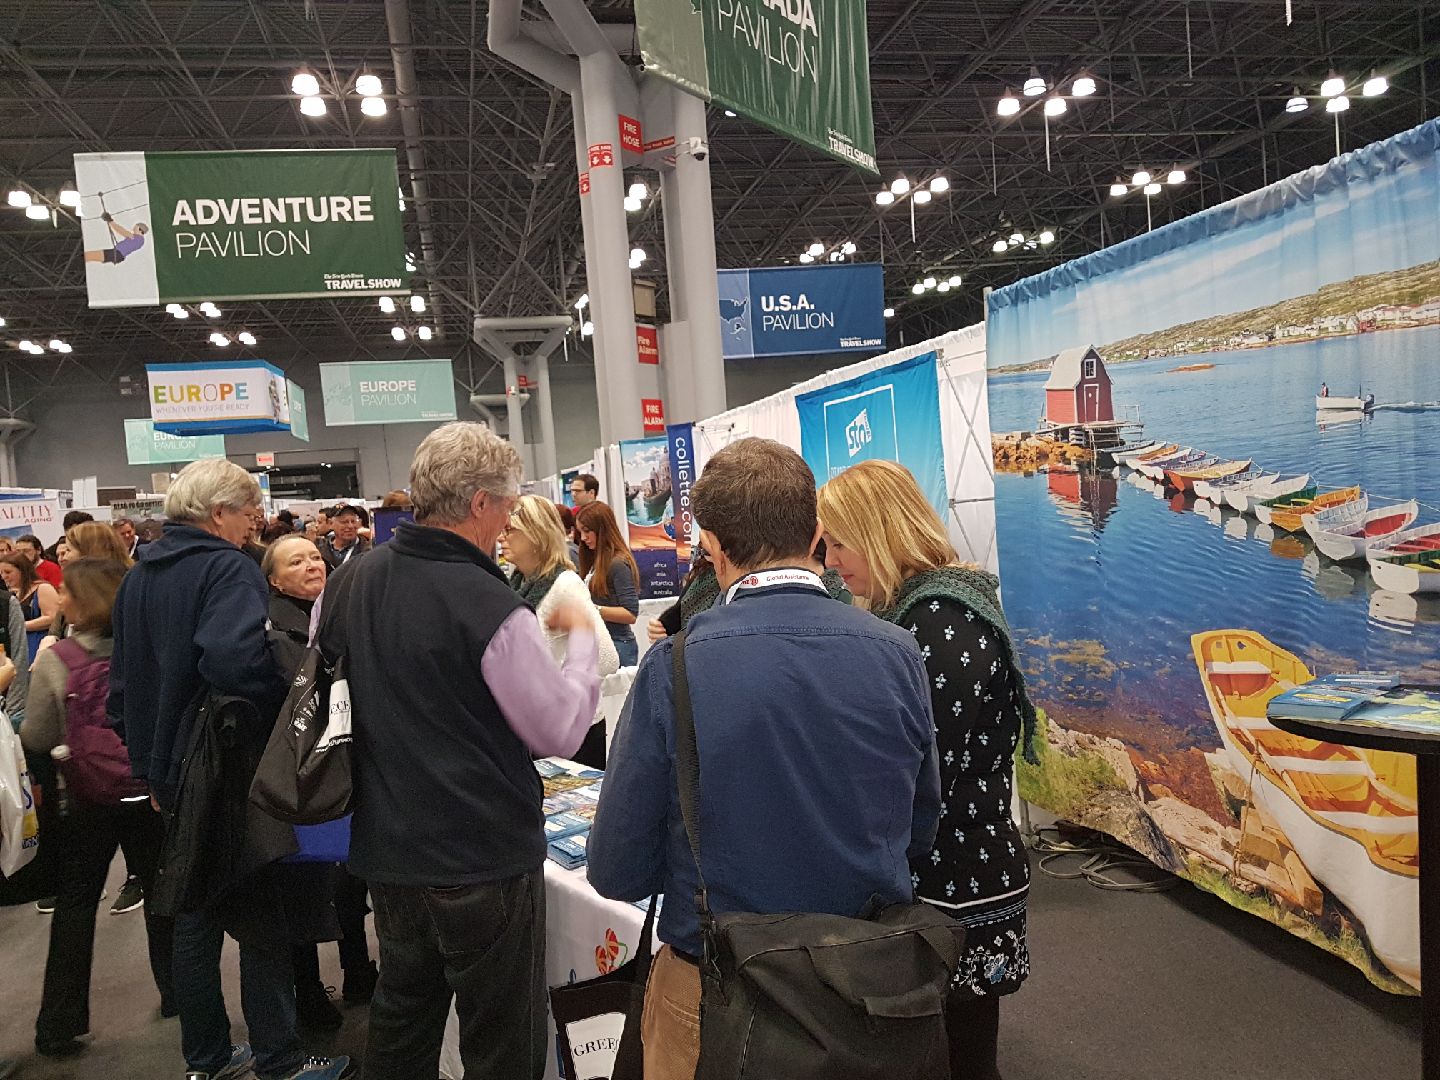 Maxxim Vacations sees huge potential in New York market